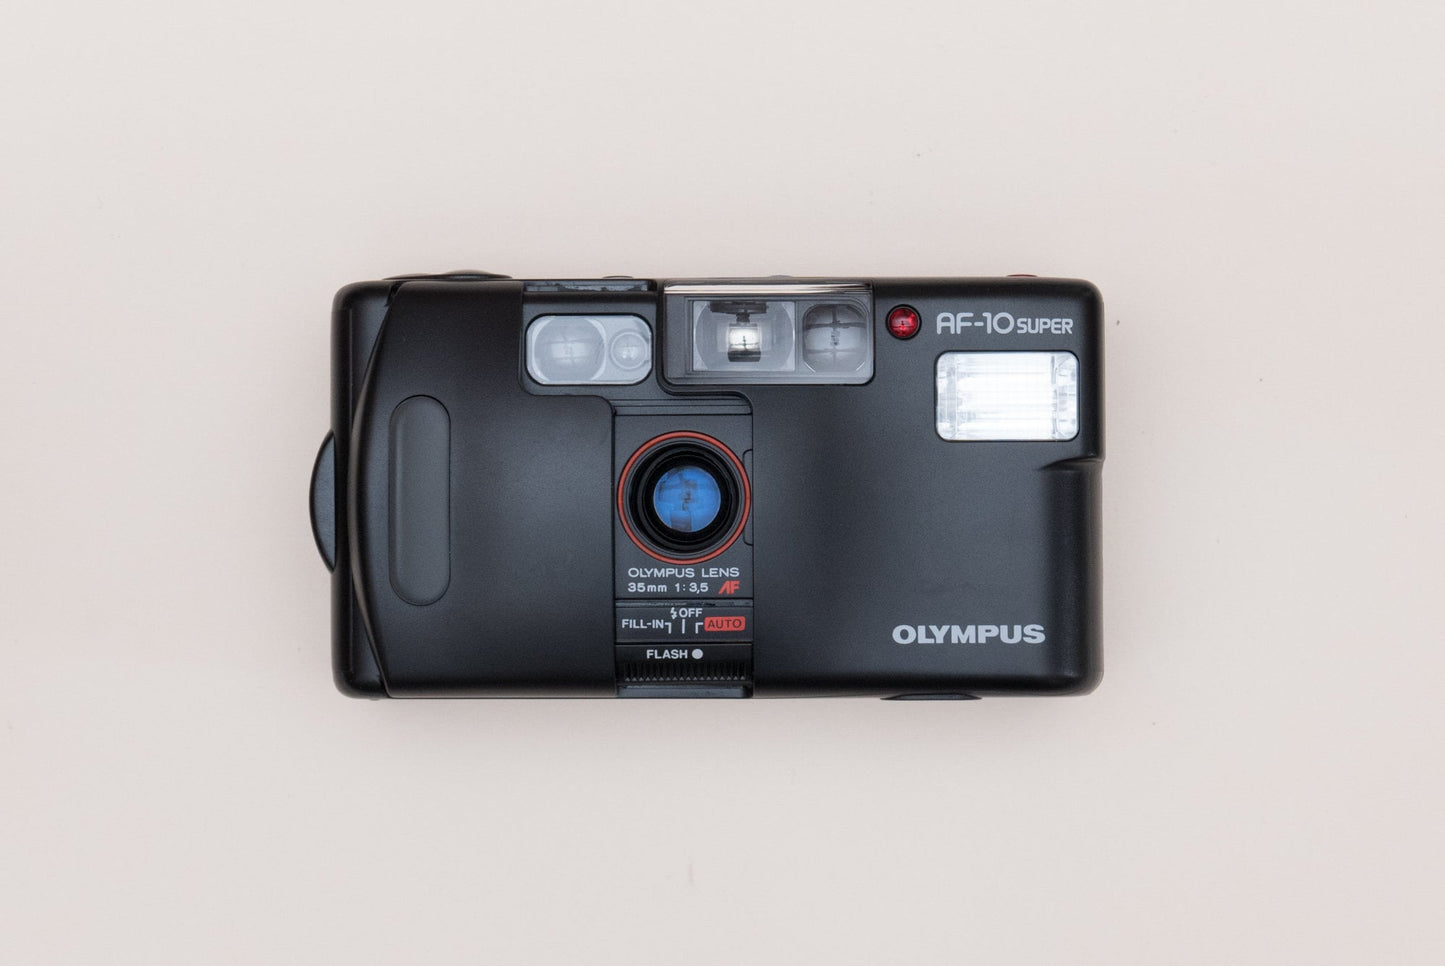 Olympus AF-10 SUPER Compact 35mm Point and Shoot Film Camera